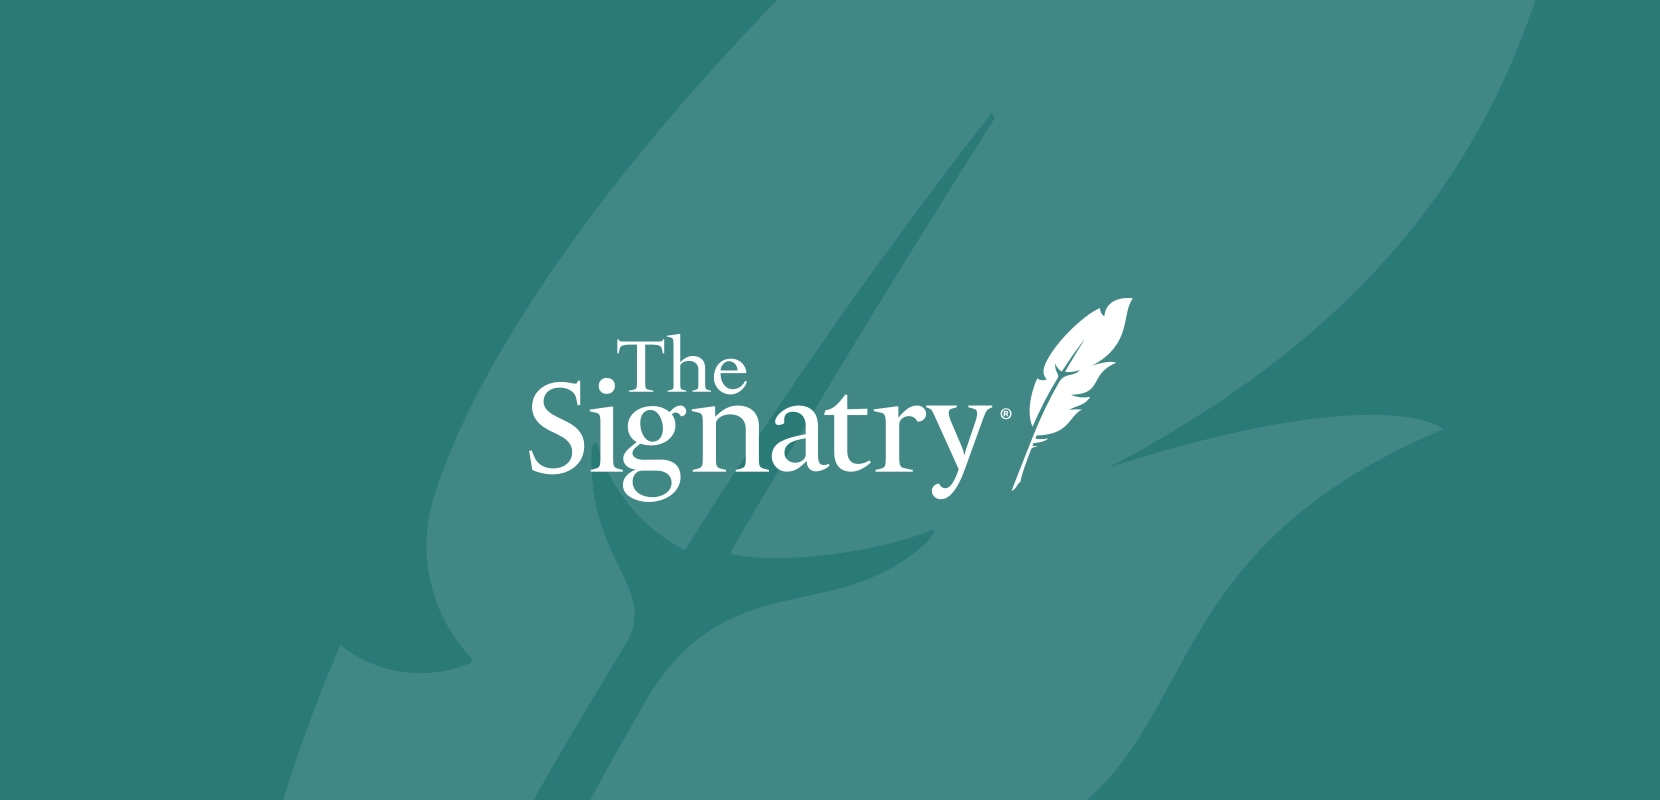 The Signatry with quill